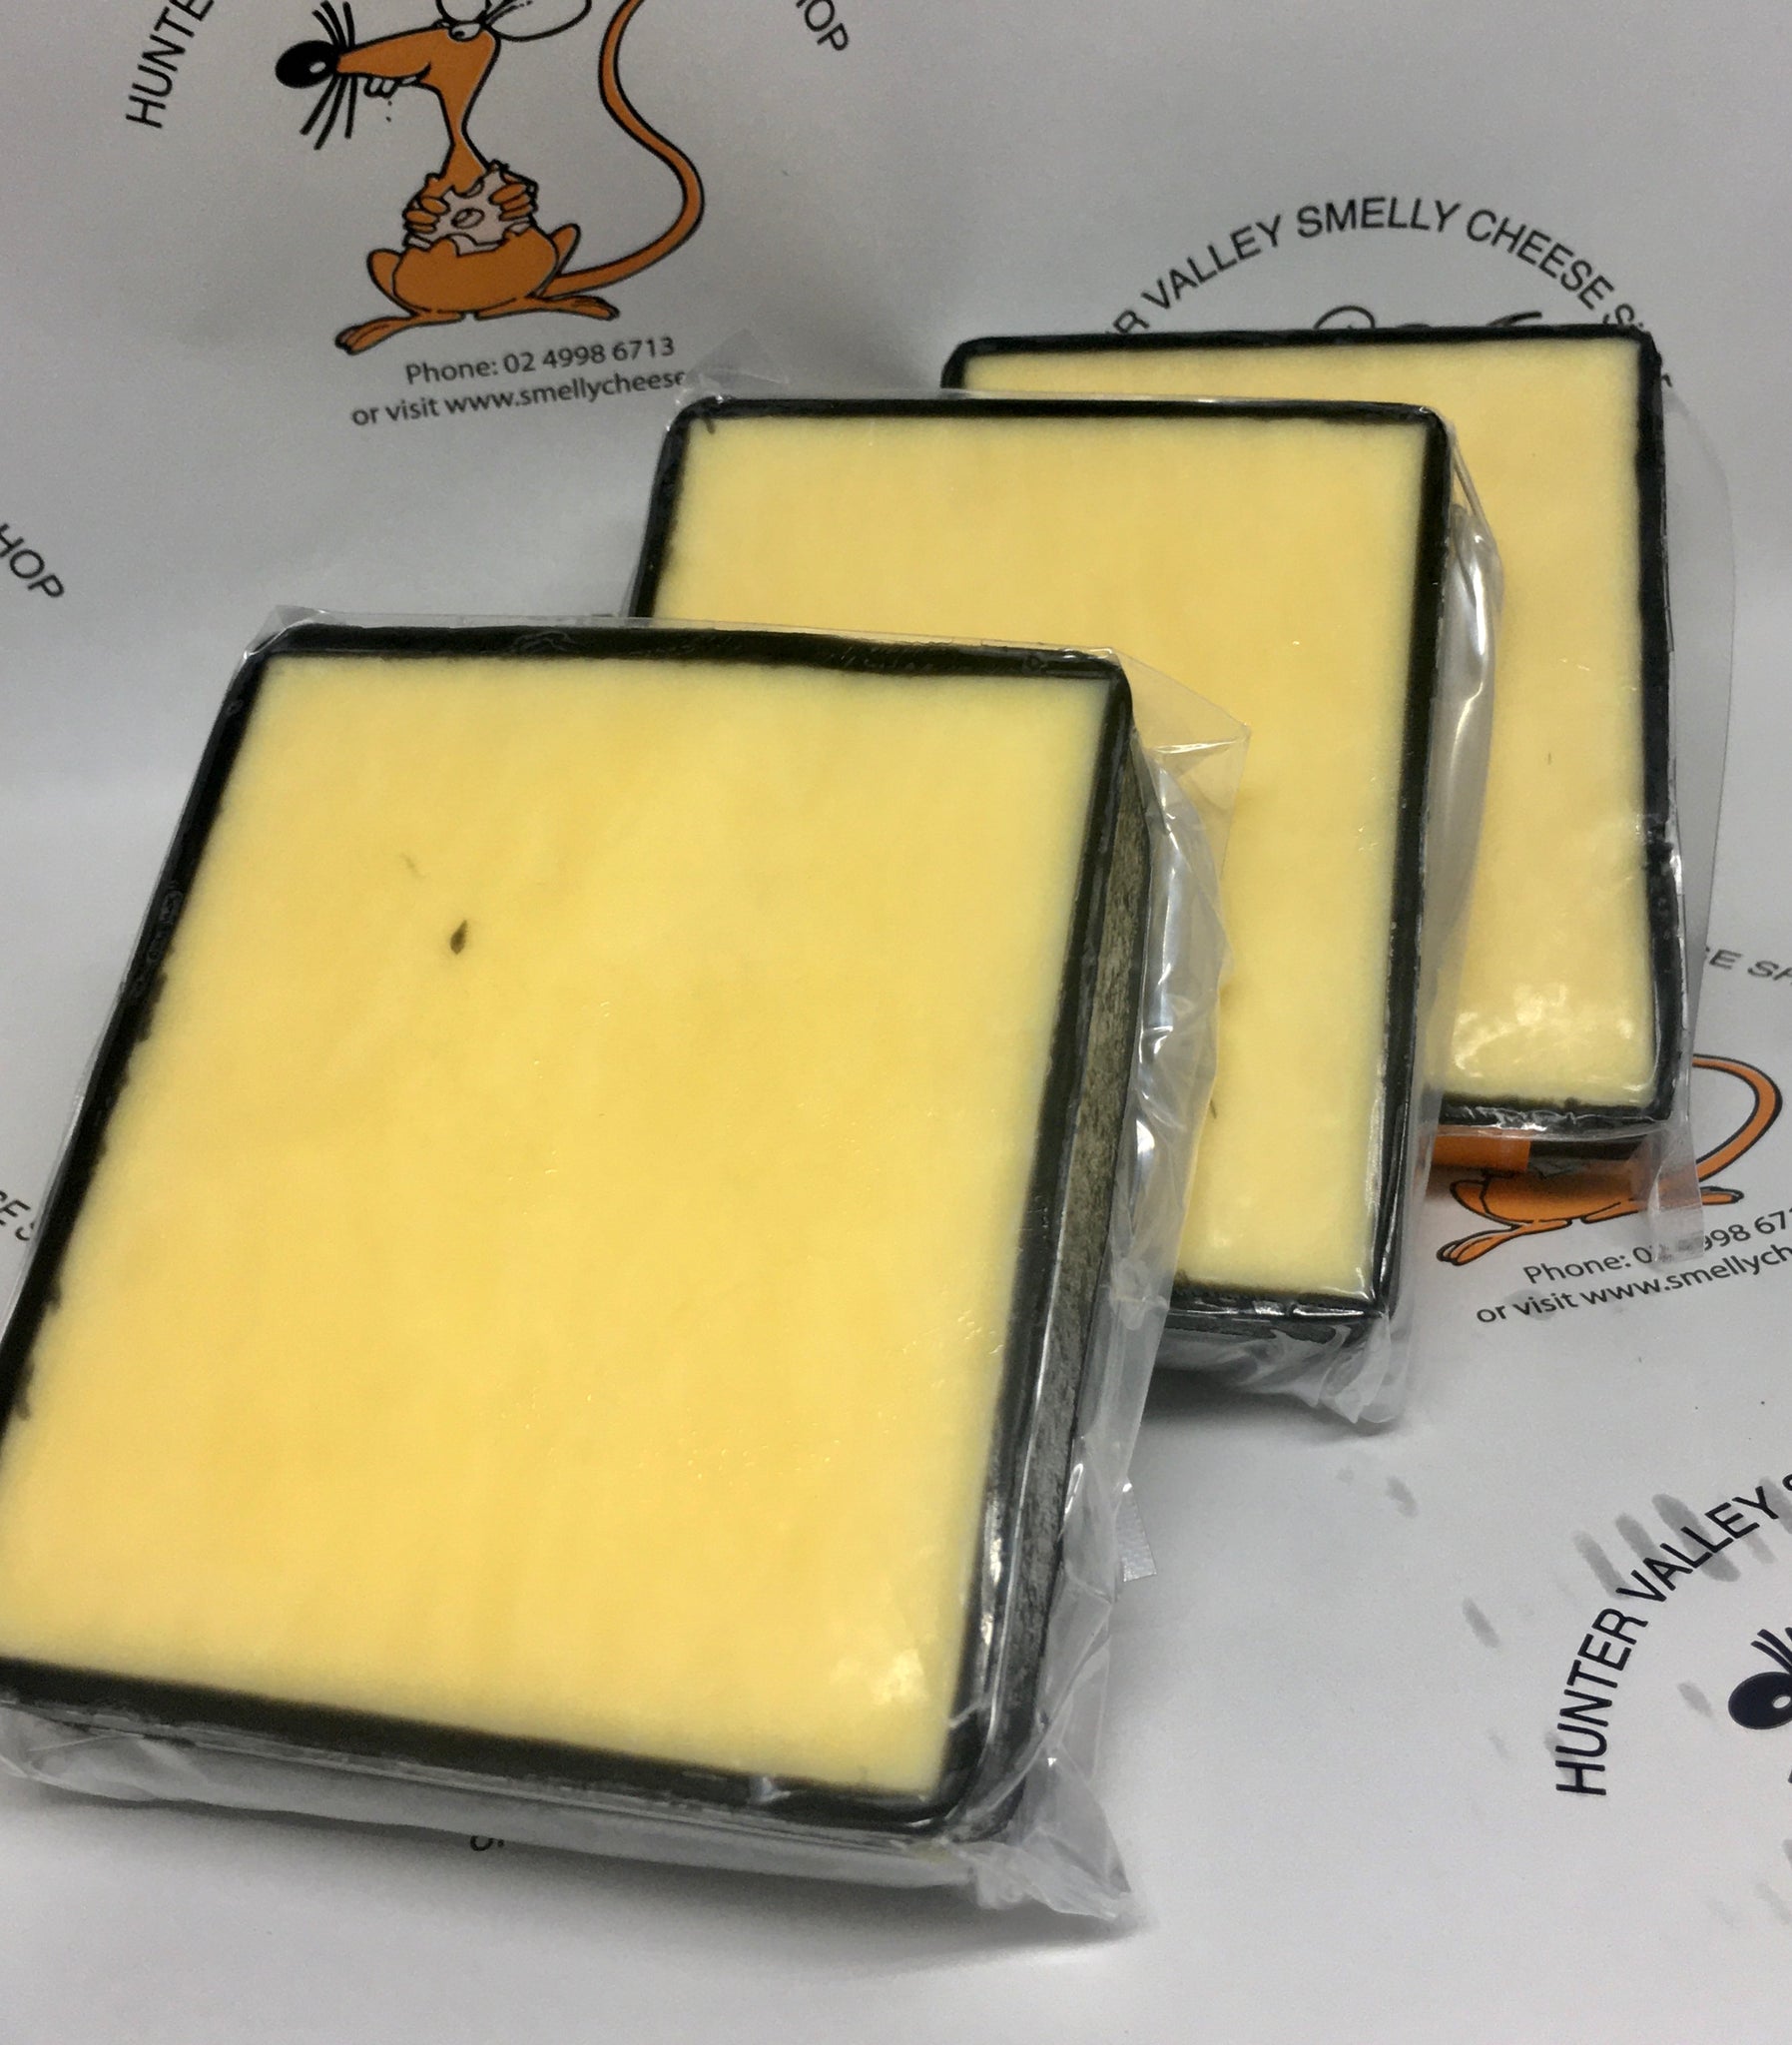 Smelly's Own - Vintage Mature Cheddar